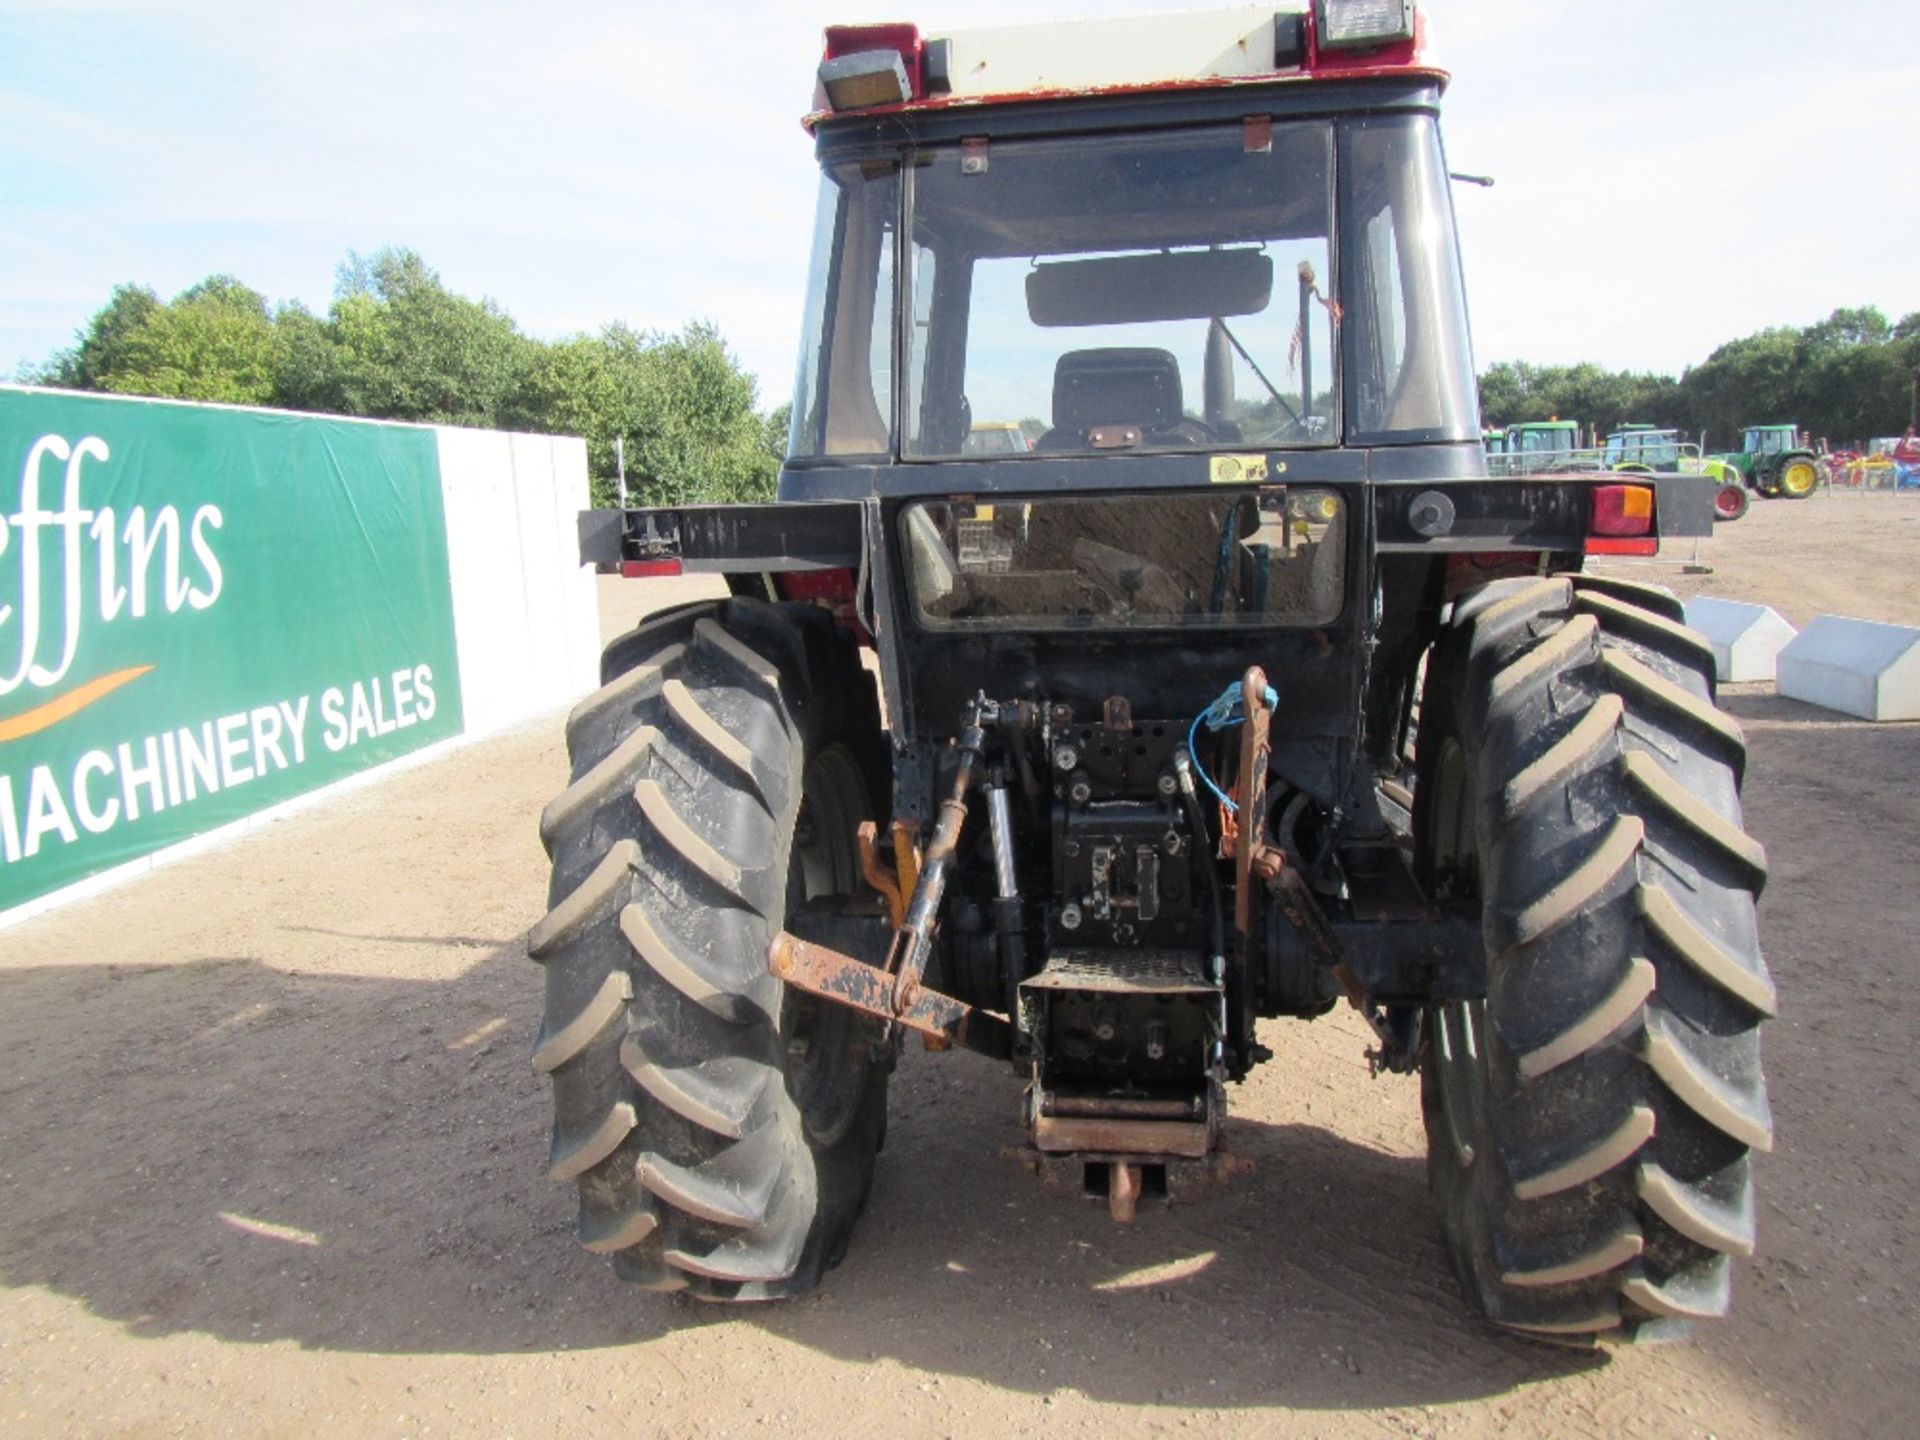 1992 Case International 844XL 4wd Tractor Reg. No. K394 PPV - Image 7 of 15